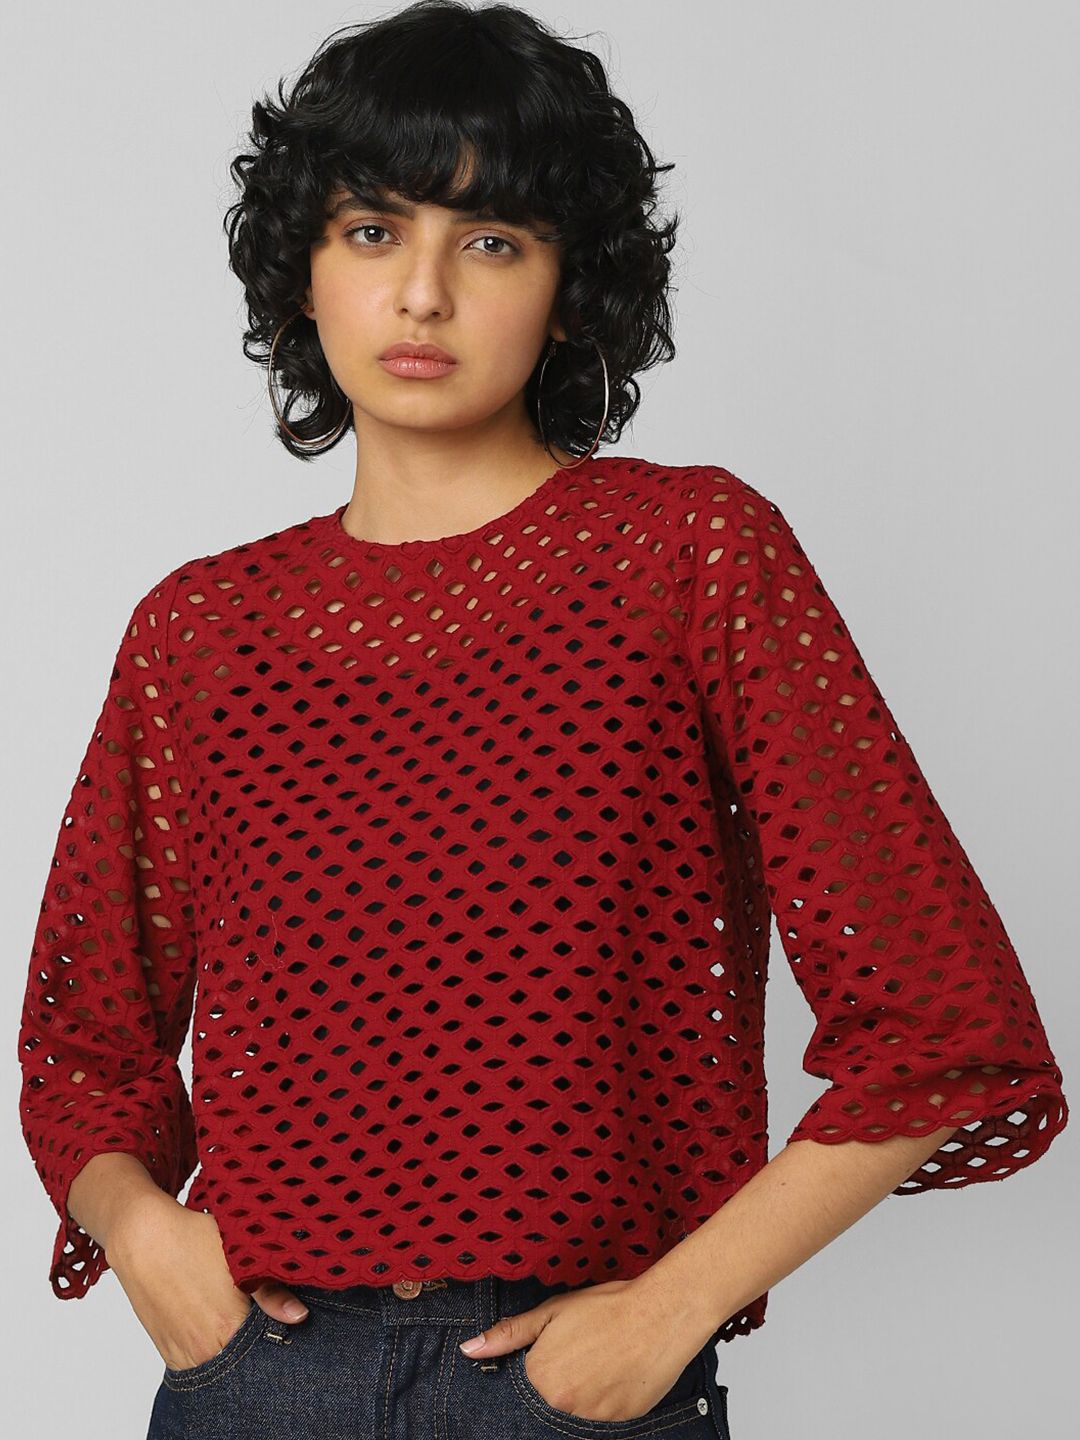 ONLY Women Red Solid Self Design Top Price in India